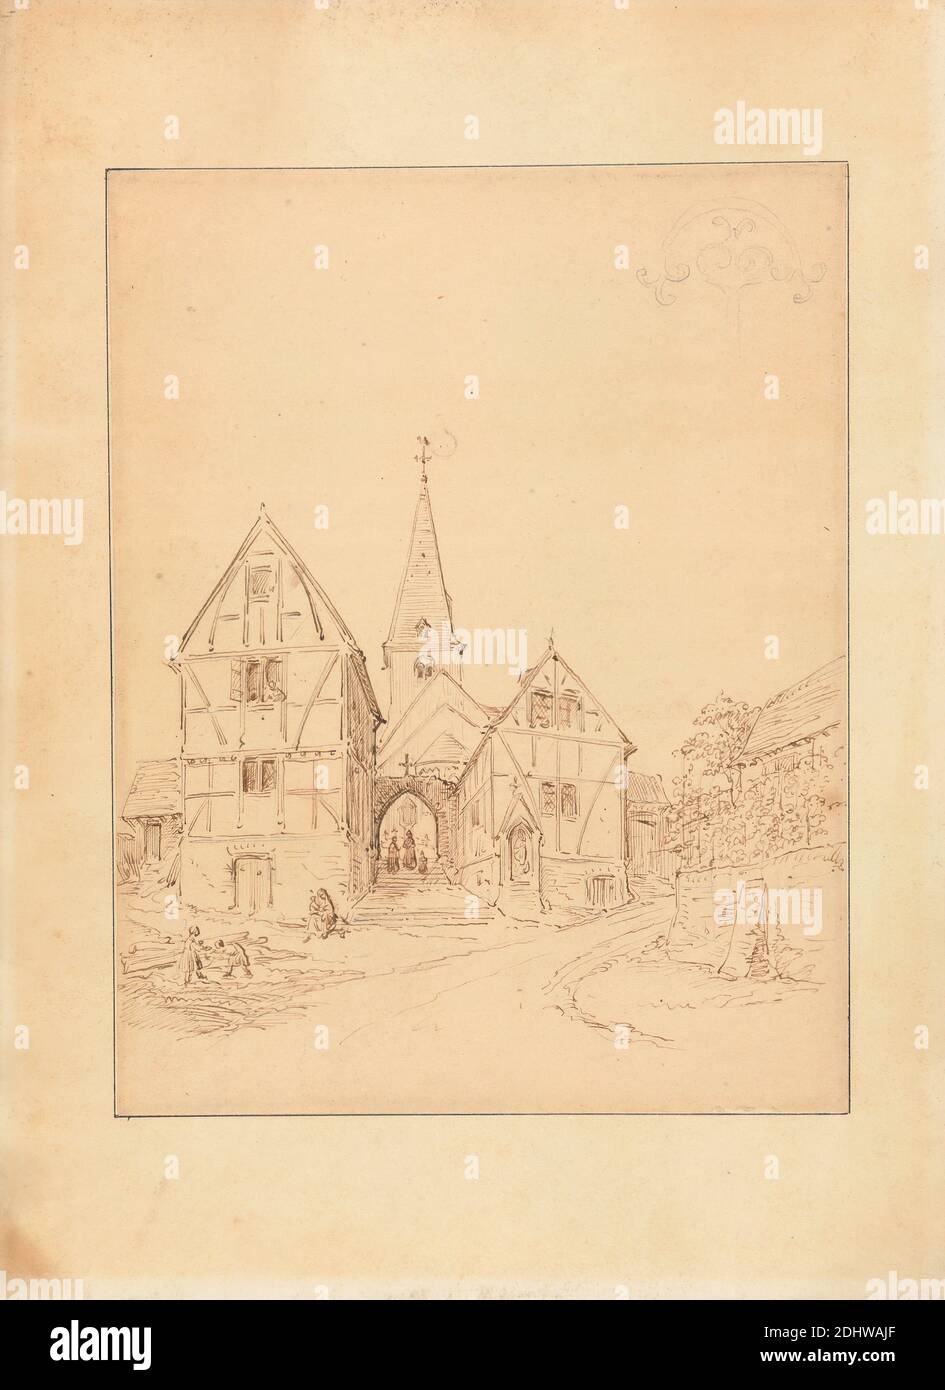 Sketch of a Small Gothic Church, with a Design for Gothic Ornamentation, Augustus Welby Northmore Pugin, 1812–1852, British, Augustus Charles Pugin, 1762–1832, French, undated, Pen and brown ink and graphite on smooth, thin, cream wove paper, Sheet: 7 3/4 × 6 inches (19.7 × 15.2 cm) and Mount: 10 3/4 × 7 3/4 inches (27.3 × 19.7 cm), architectural subject, church, crucifix, Gothic (Medieval), ornamentation, people, road, steeple, trees Stock Photo